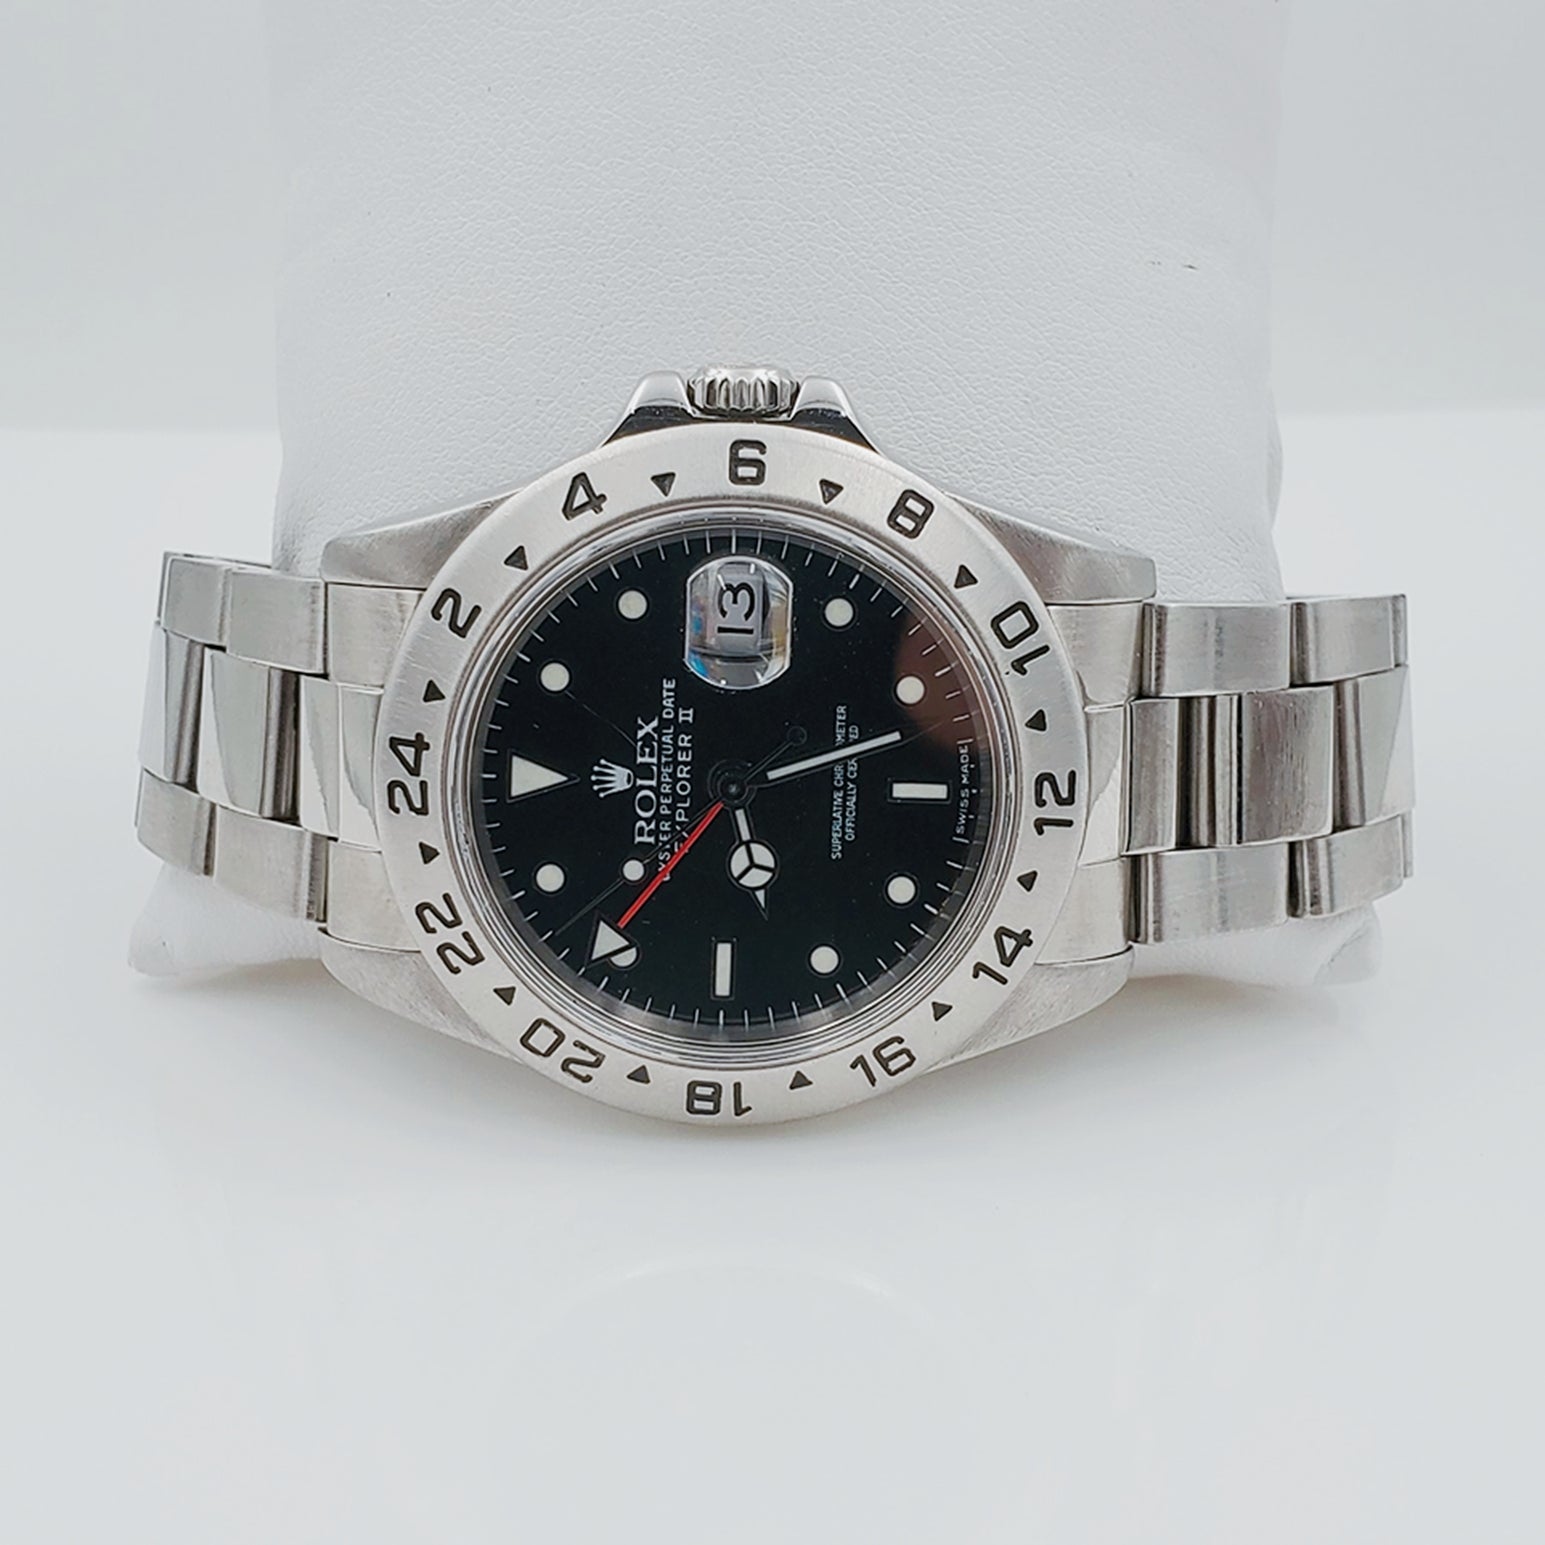 *Men's Rolex 40mm Explorer II Stainless Steel Watch with Oyster Band and Black Dial. (Pre-Owned)